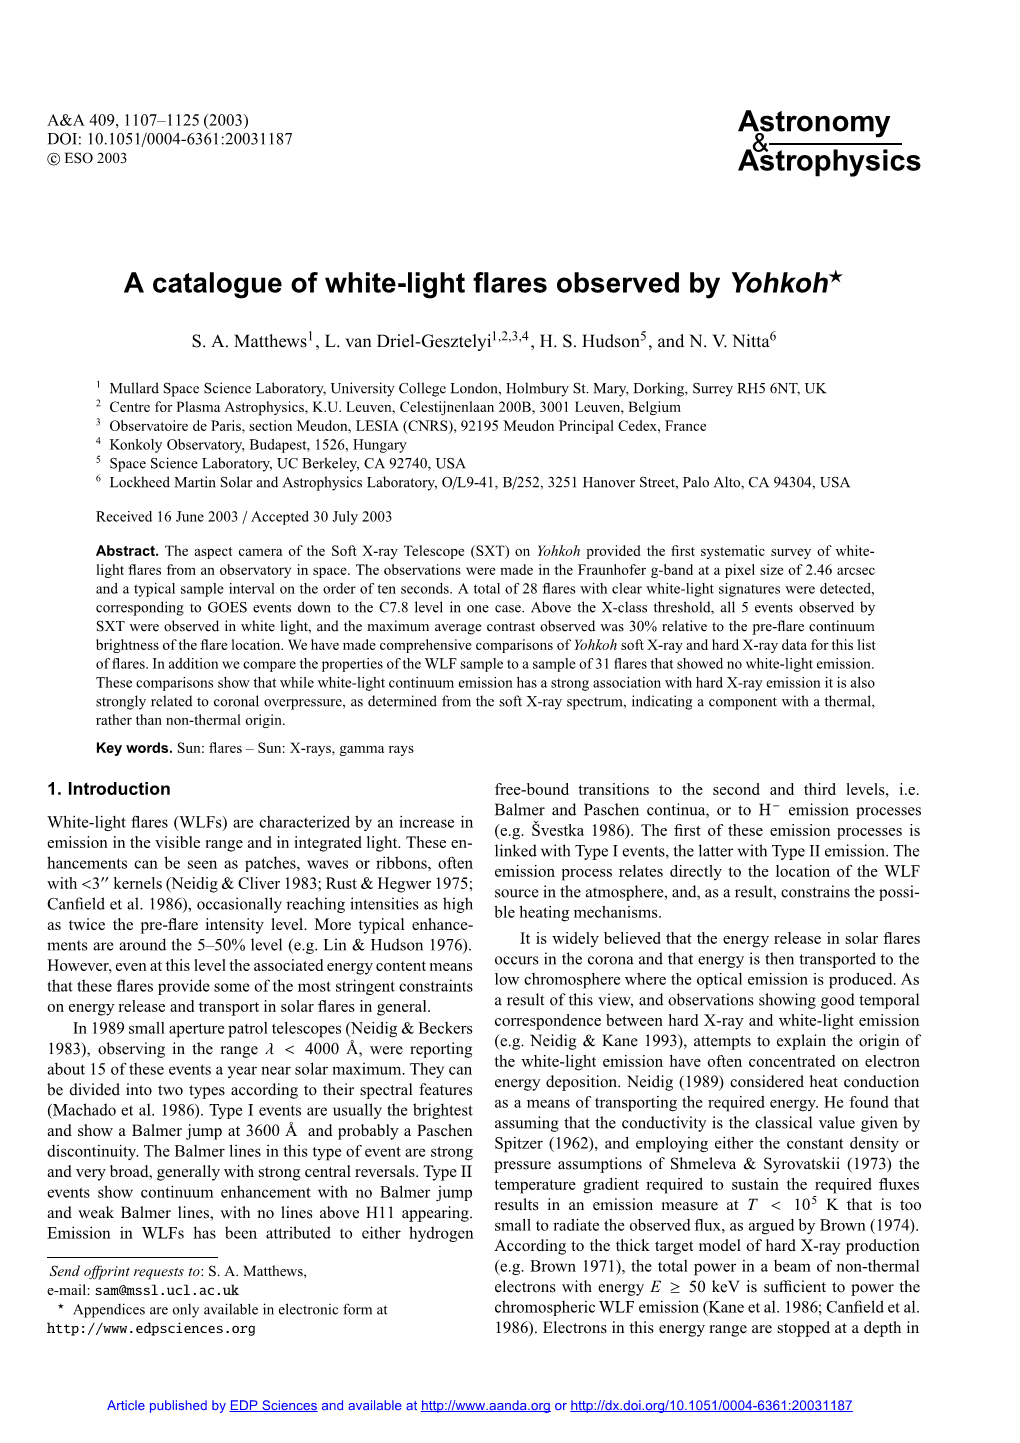 A Catalogue of White-Light Flares Observed by Yohkoh